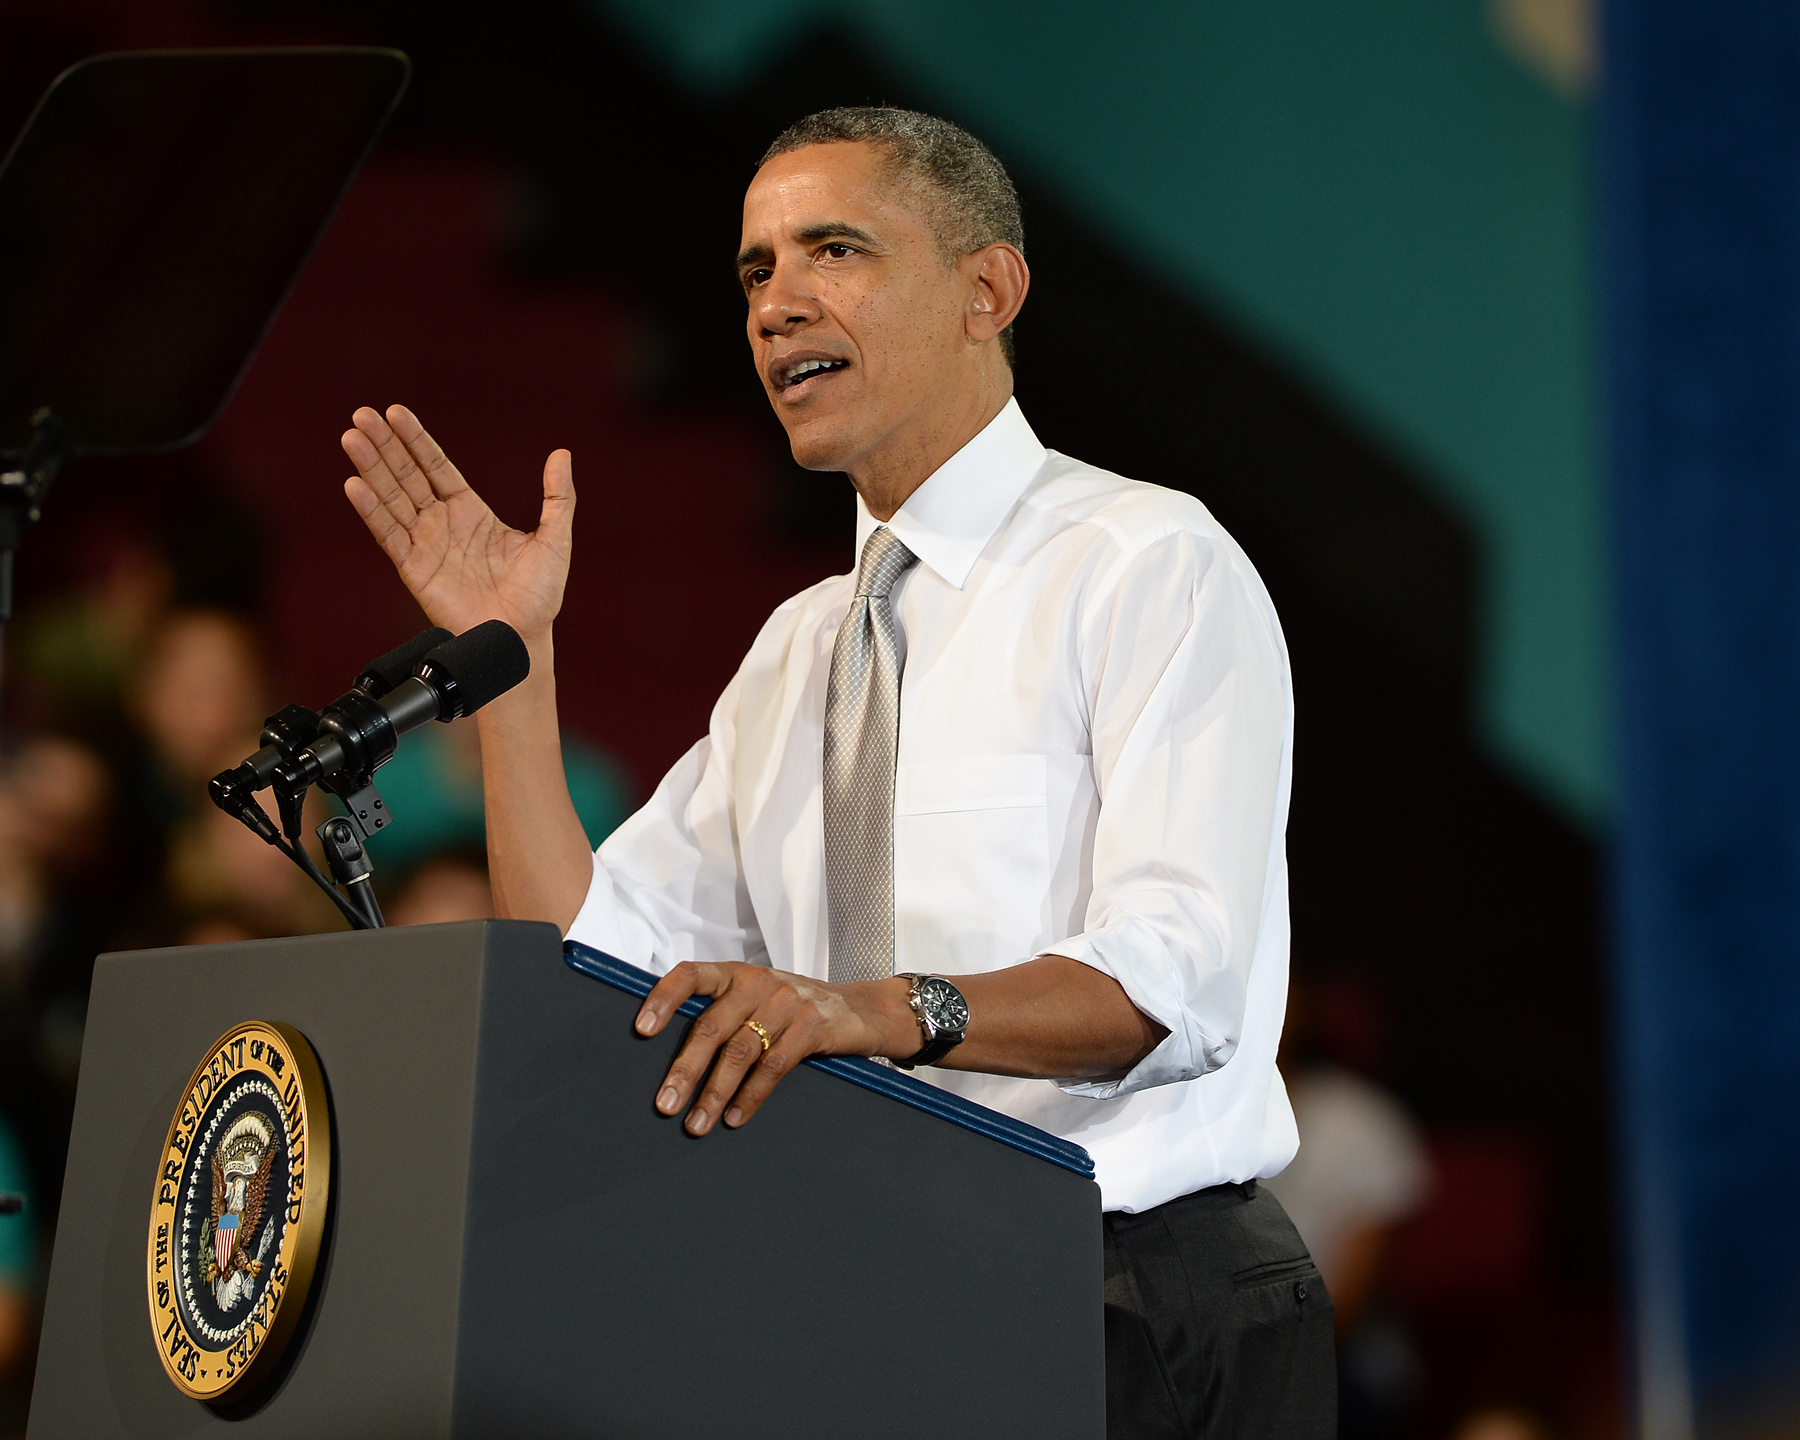 President Barack Obama delivers remarks on the quality of education at Coral Reef High School on March 7, 2014 in Miami, Fla. (Larry Marano—WireImage/Getty Images)